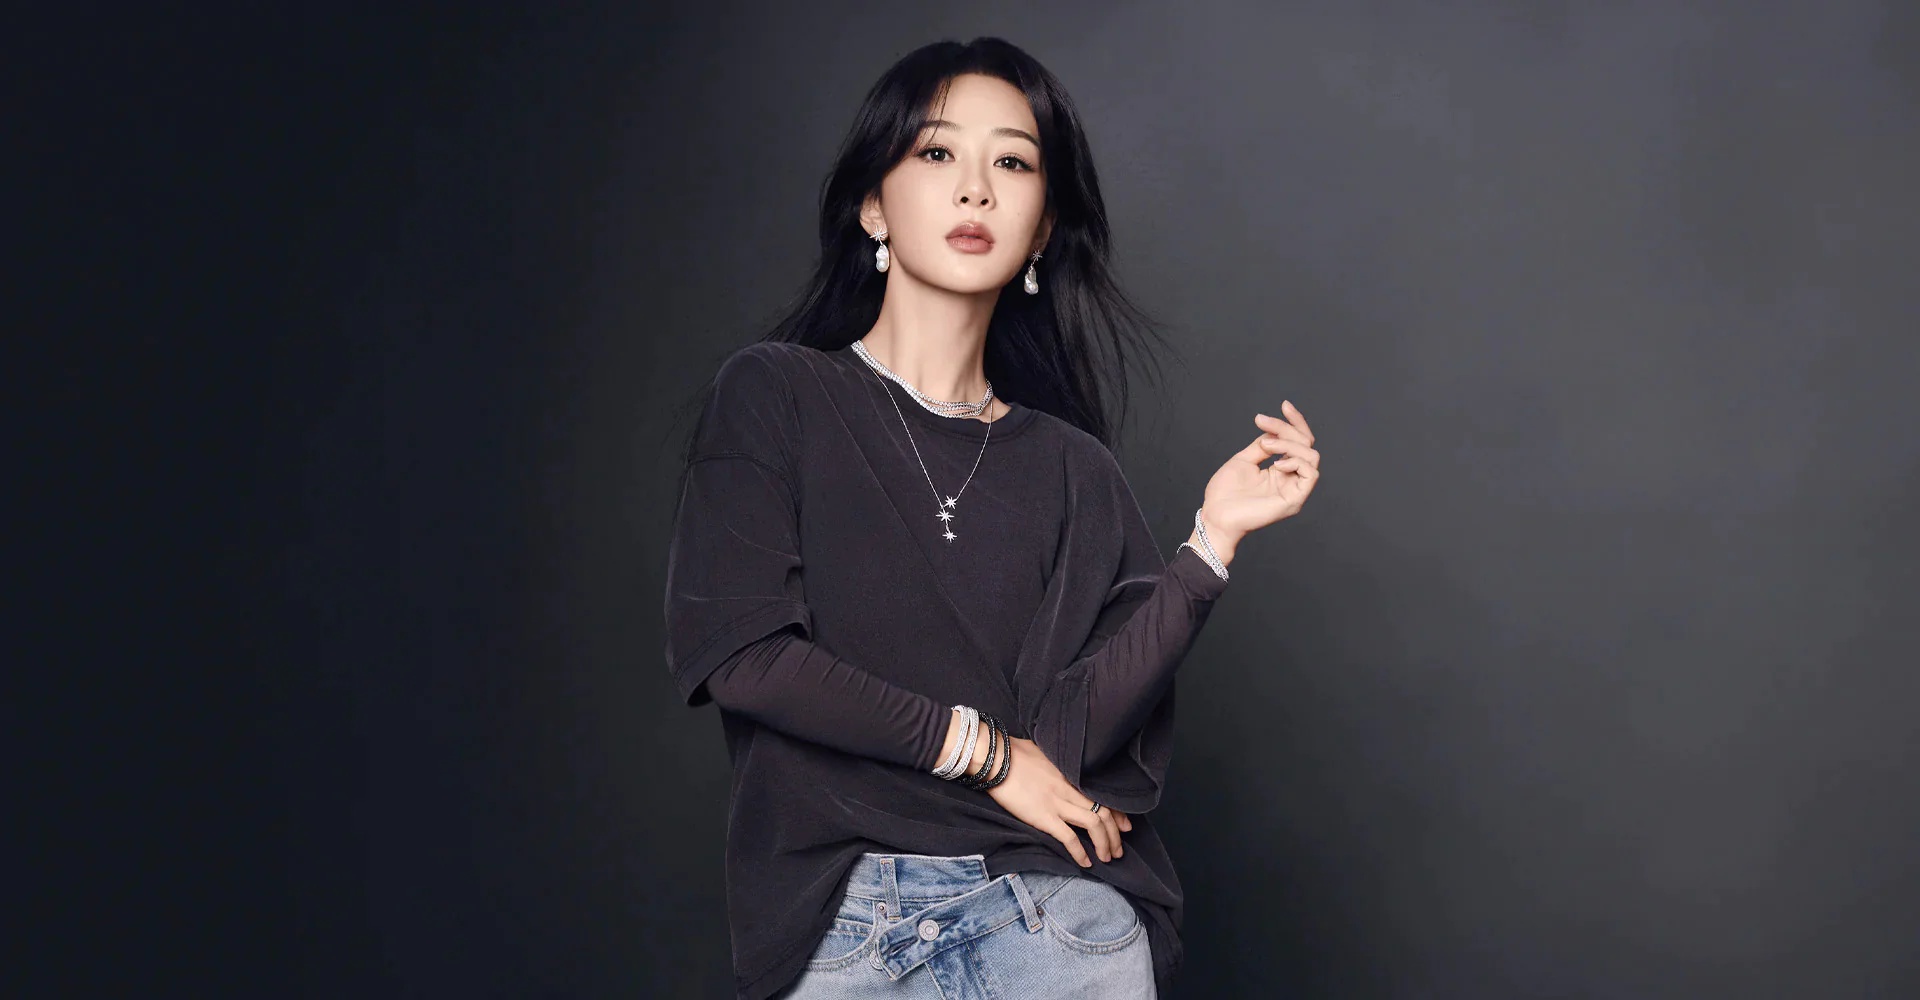 Designing a capsule for APM Monaco, Yang Zi connects the jewelry brand to Chinese fans. Photo: APM Monaco